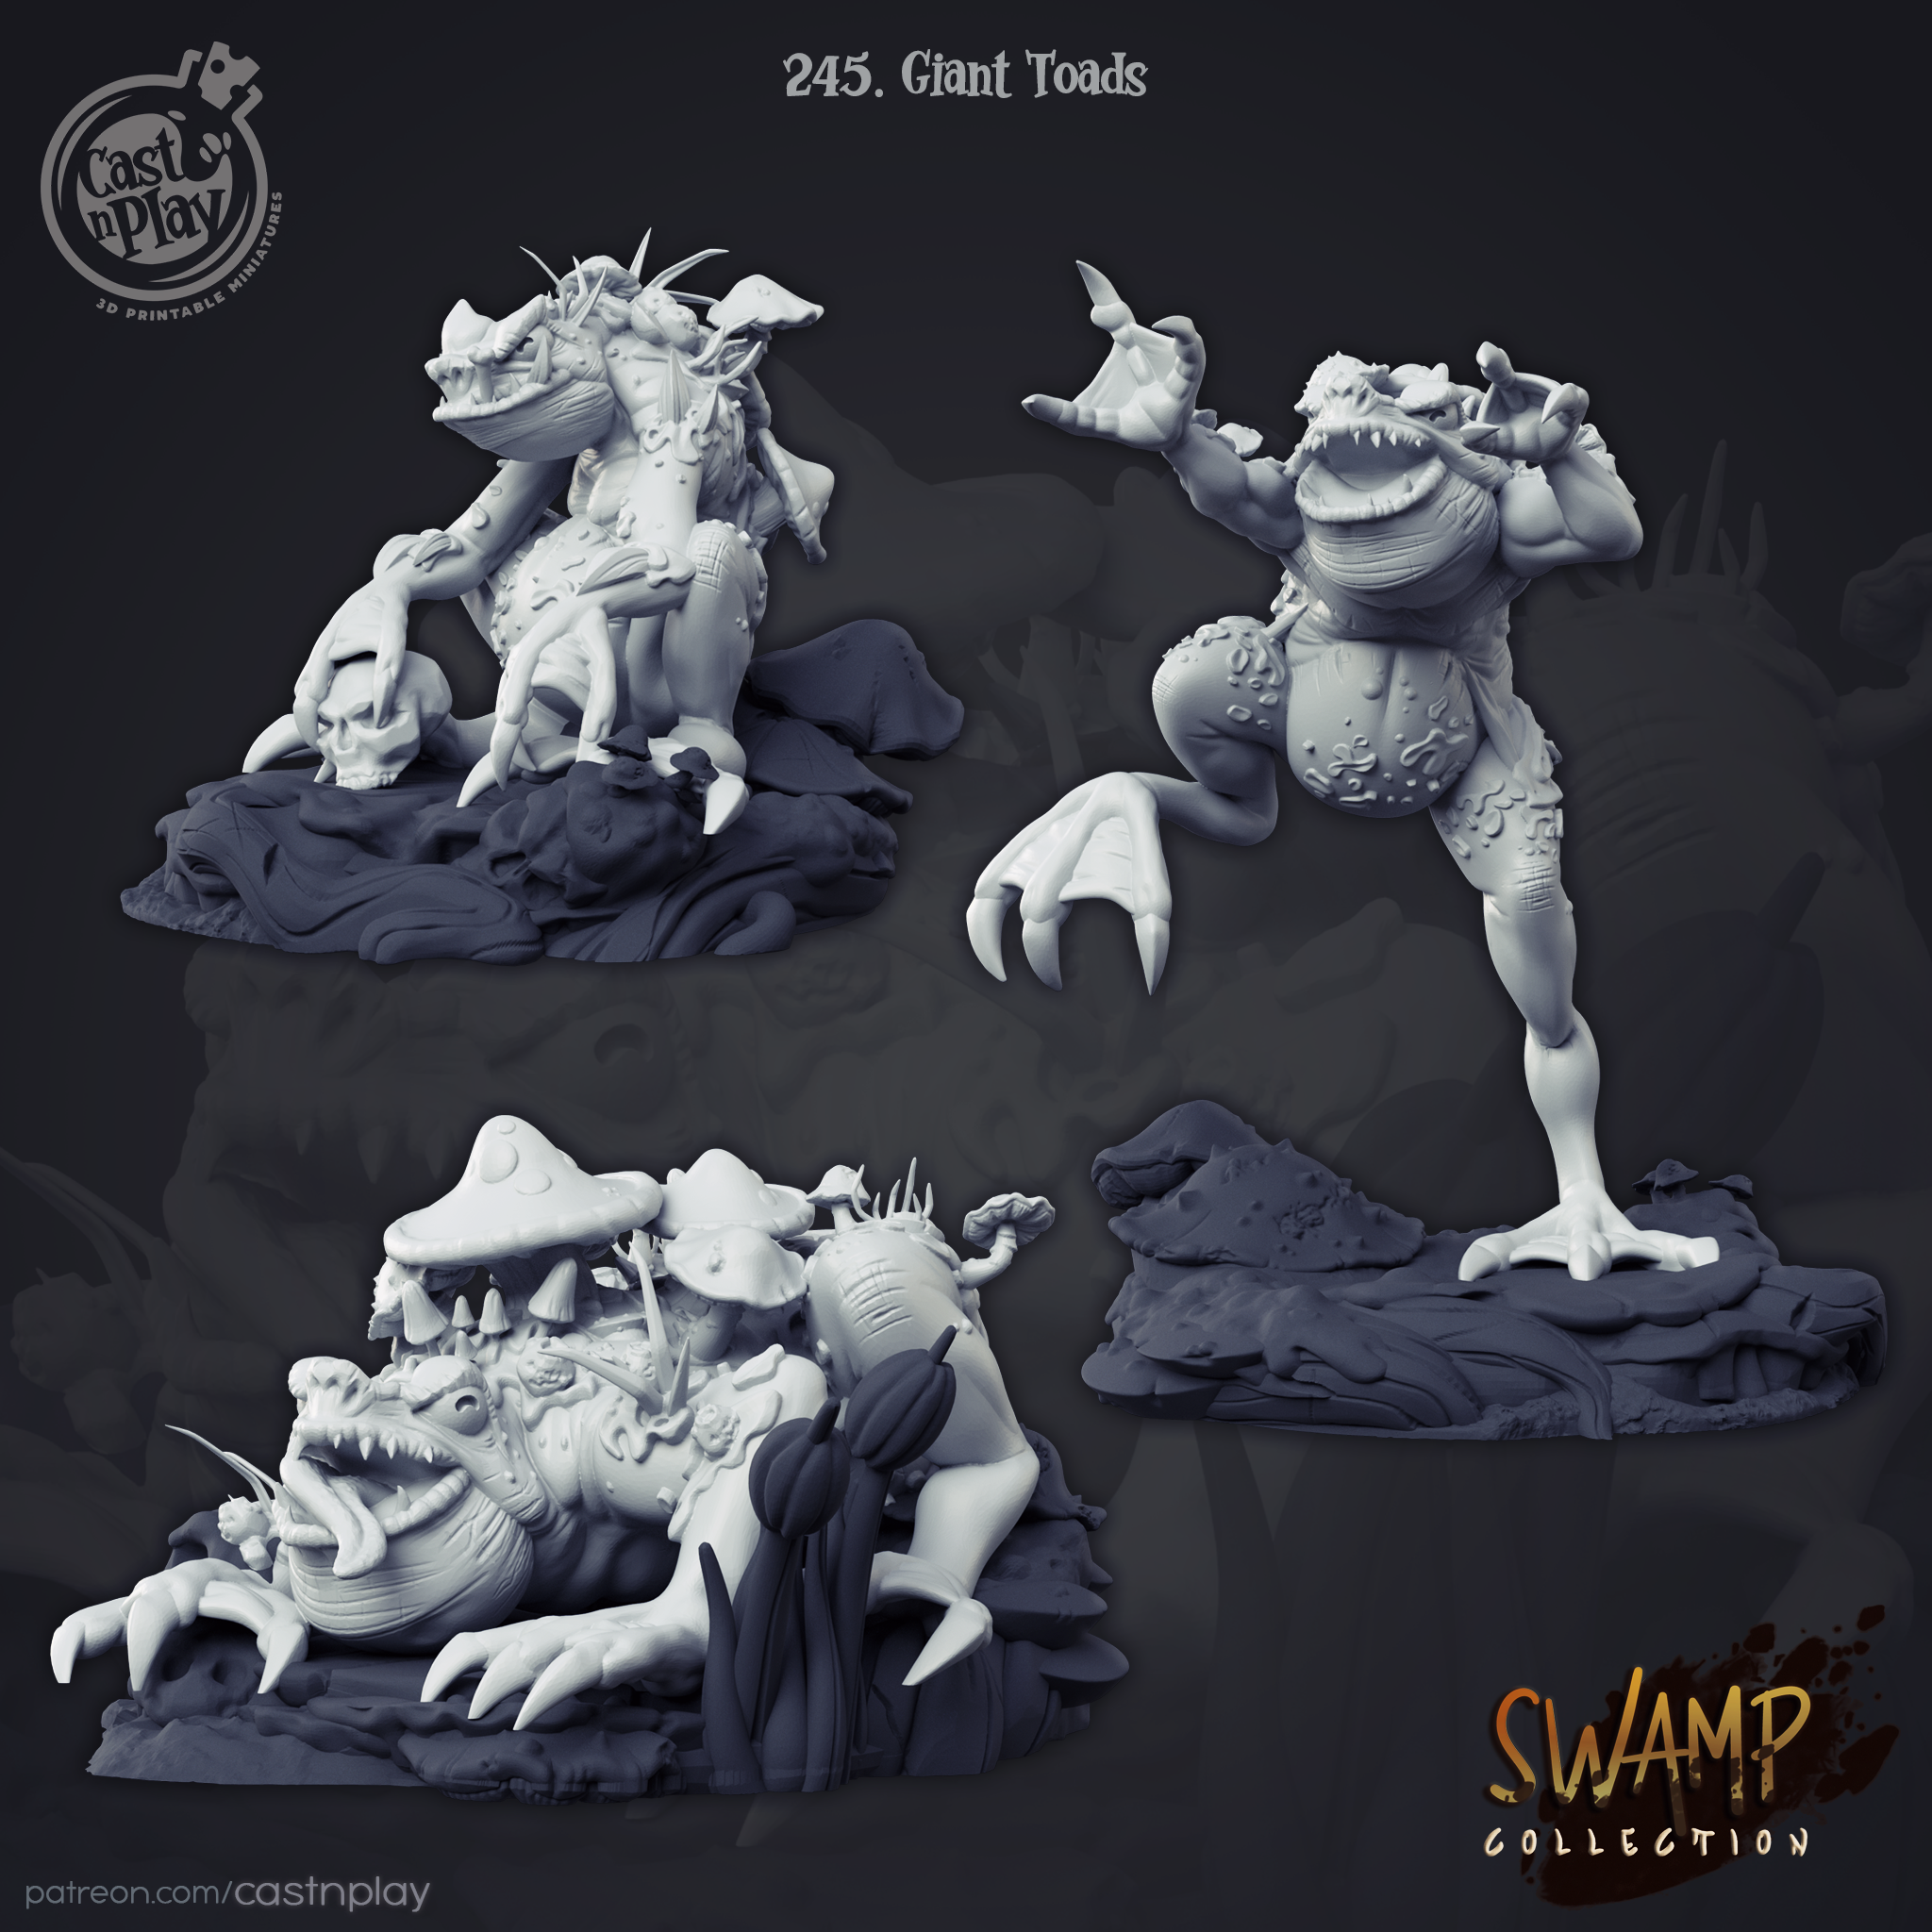 Giant Toads (245) 32mm